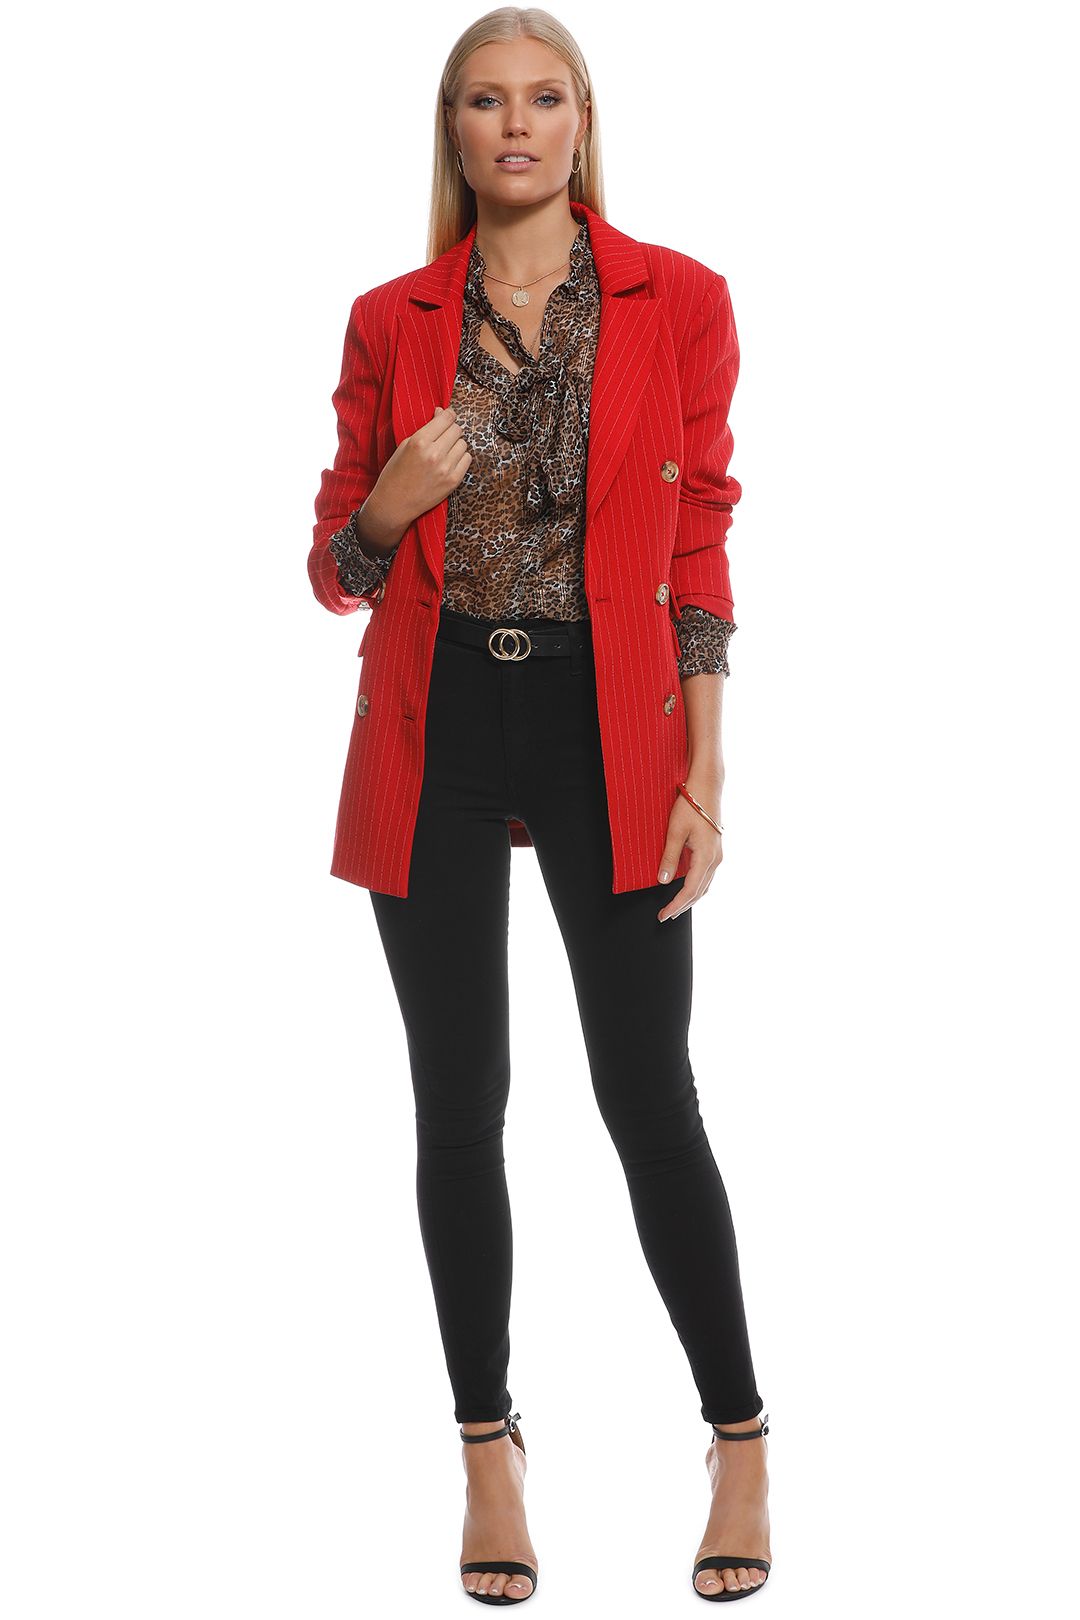 CMEO Collective - Go From Here Blazer - Red - Front